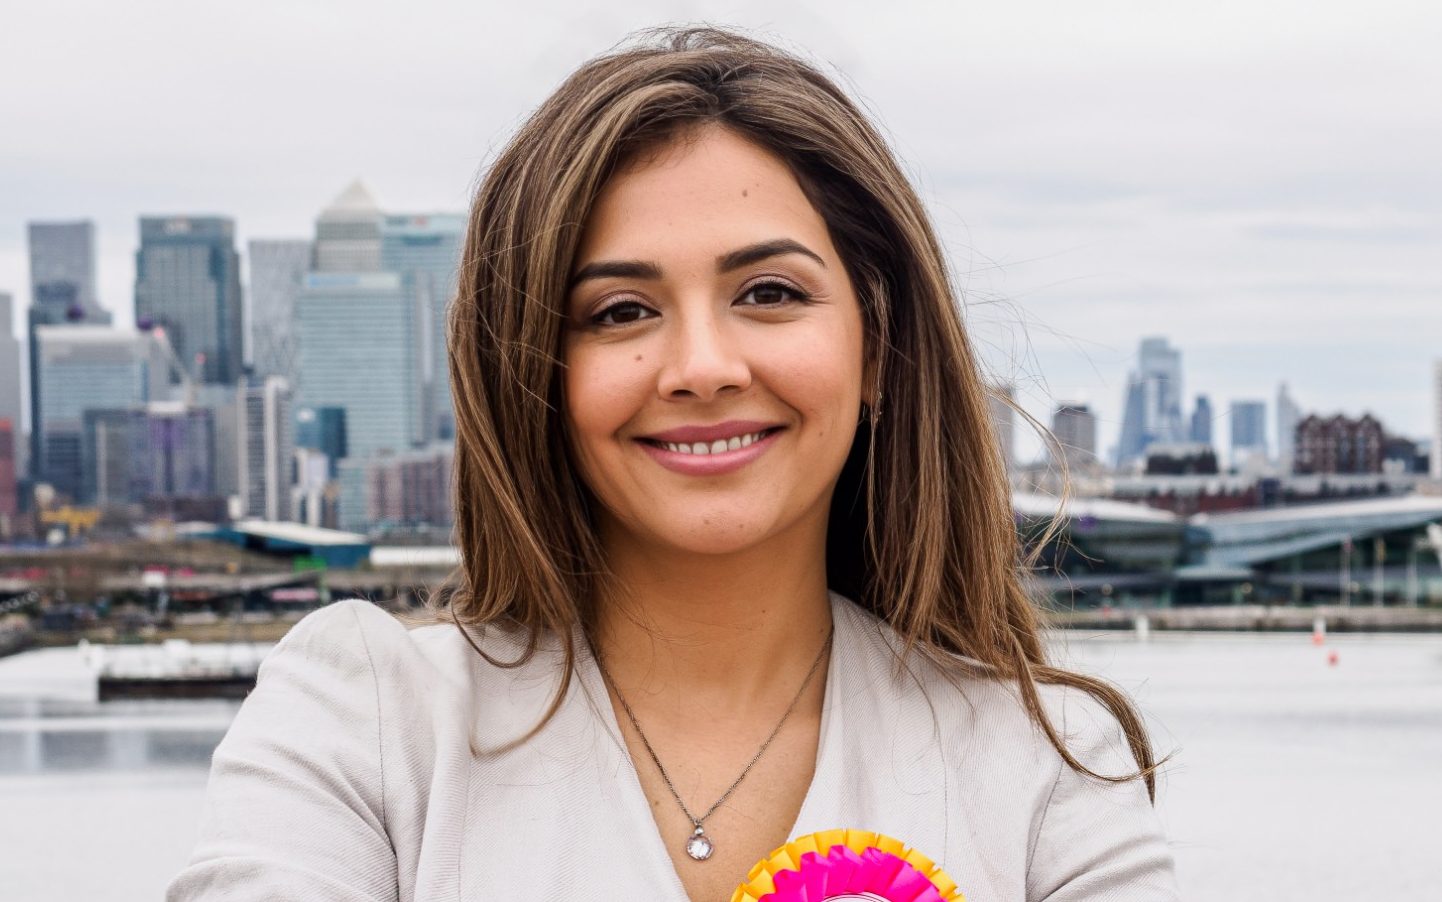 meet the candidates vying to become mayor of london